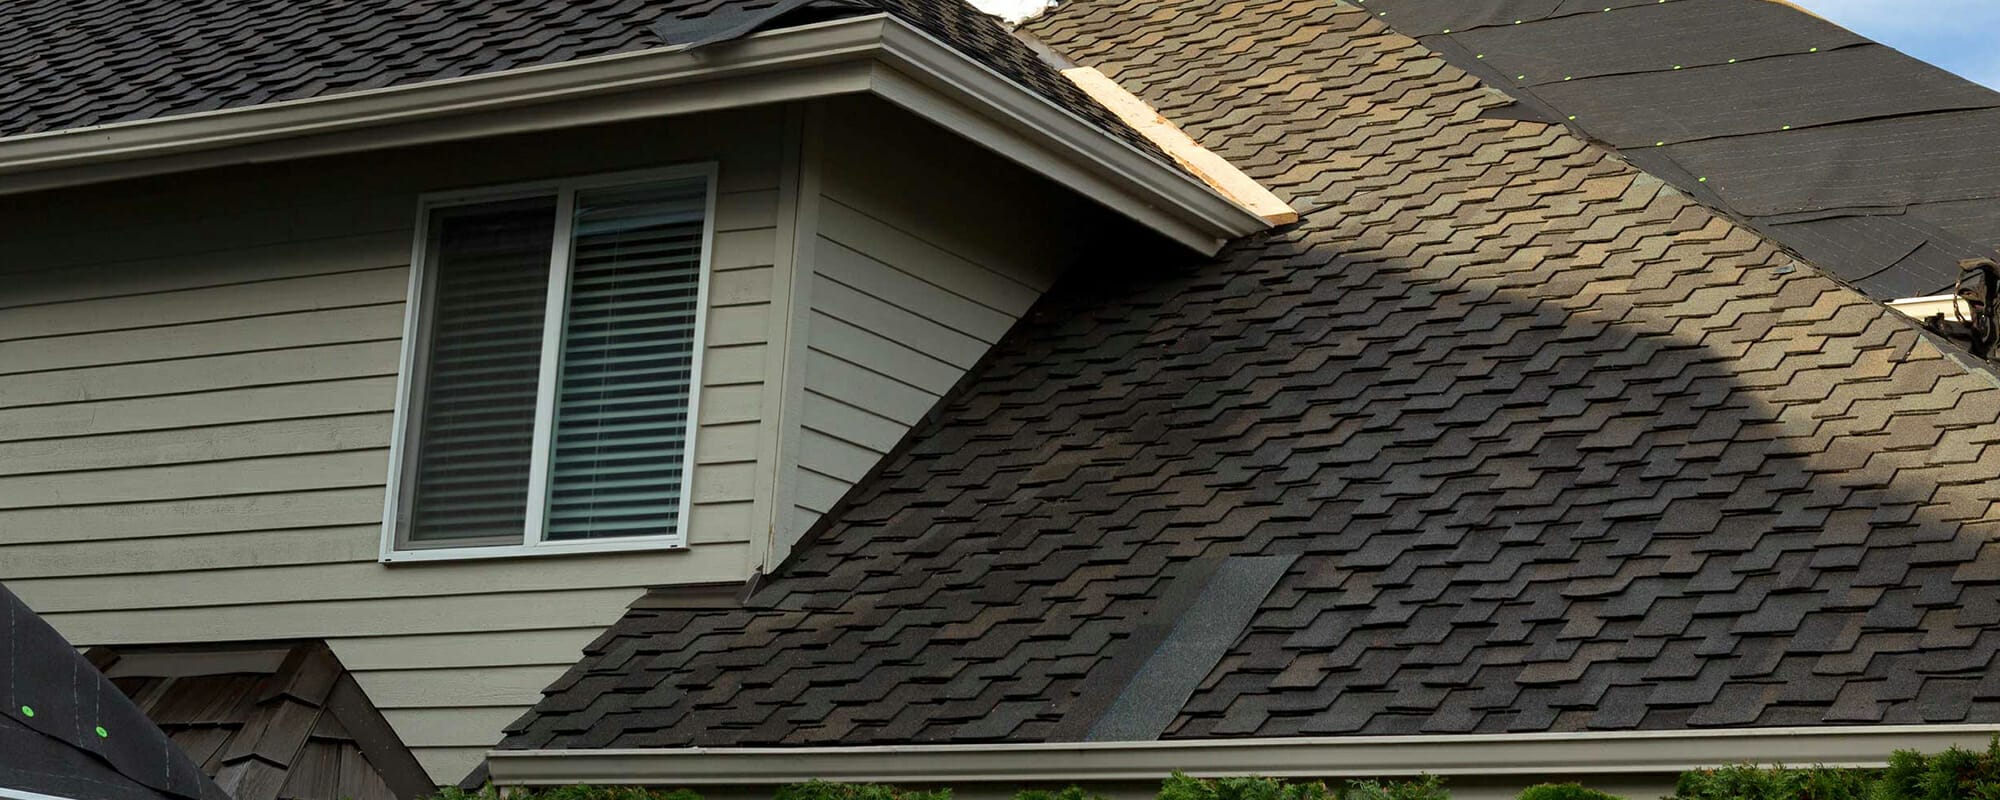 trusted roofing services Ridgewood and North Jersey